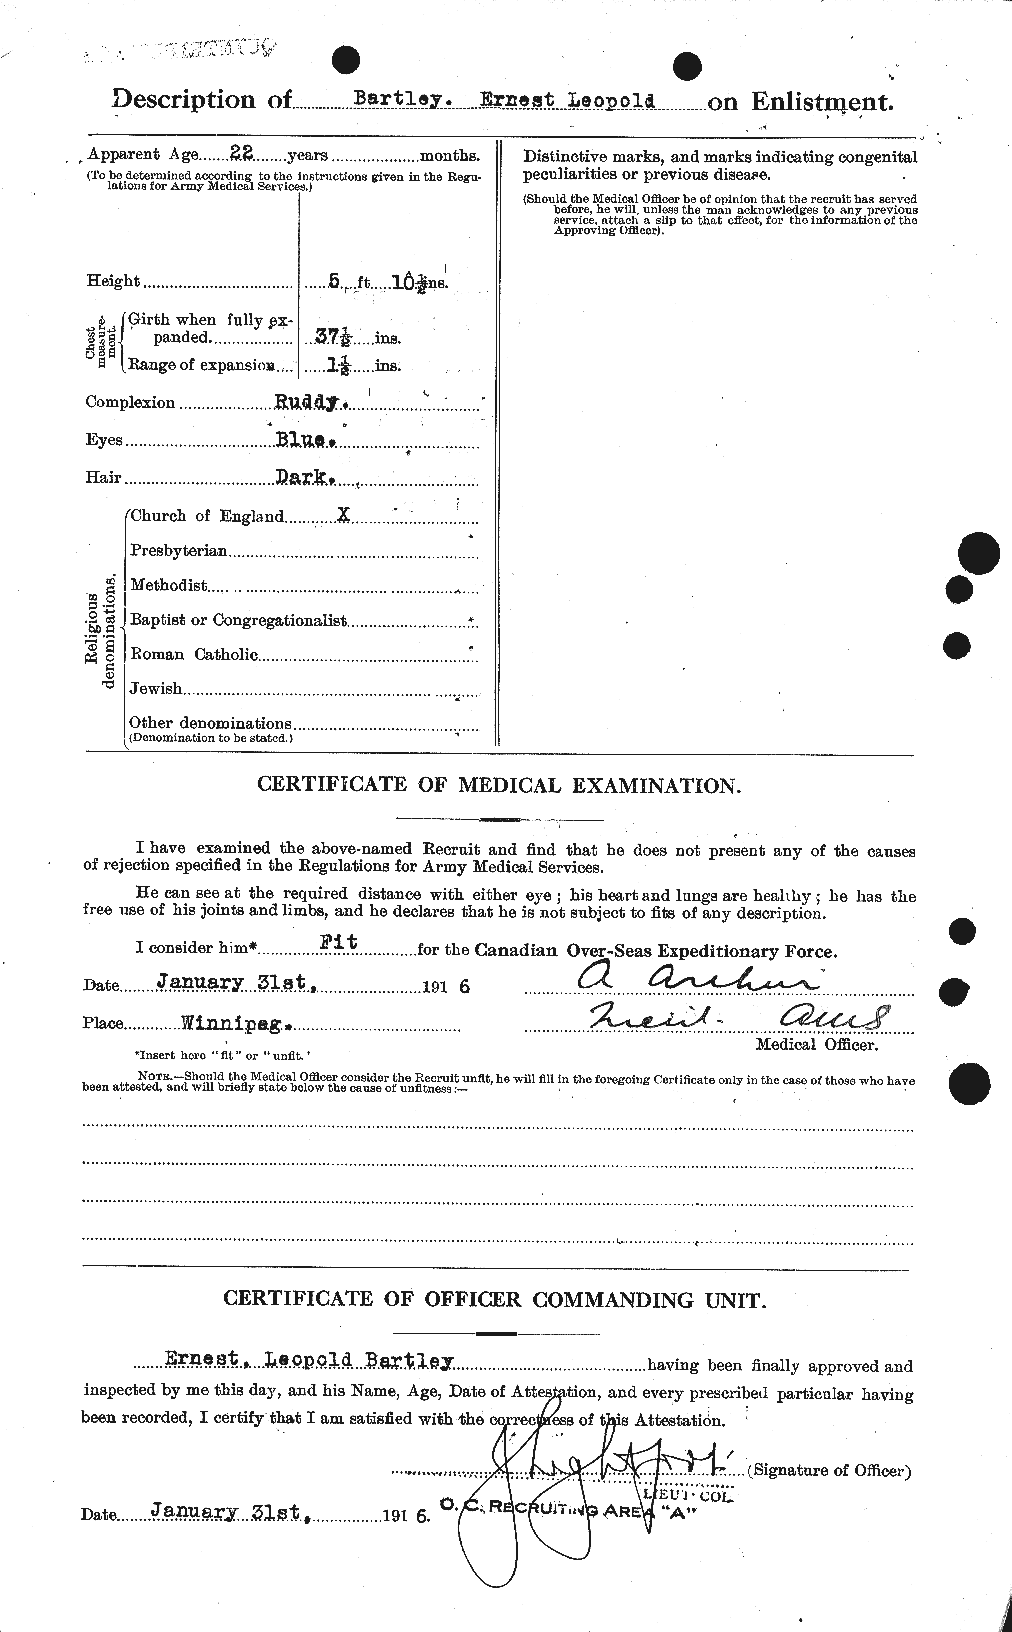 Personnel Records of the First World War - CEF 229382b